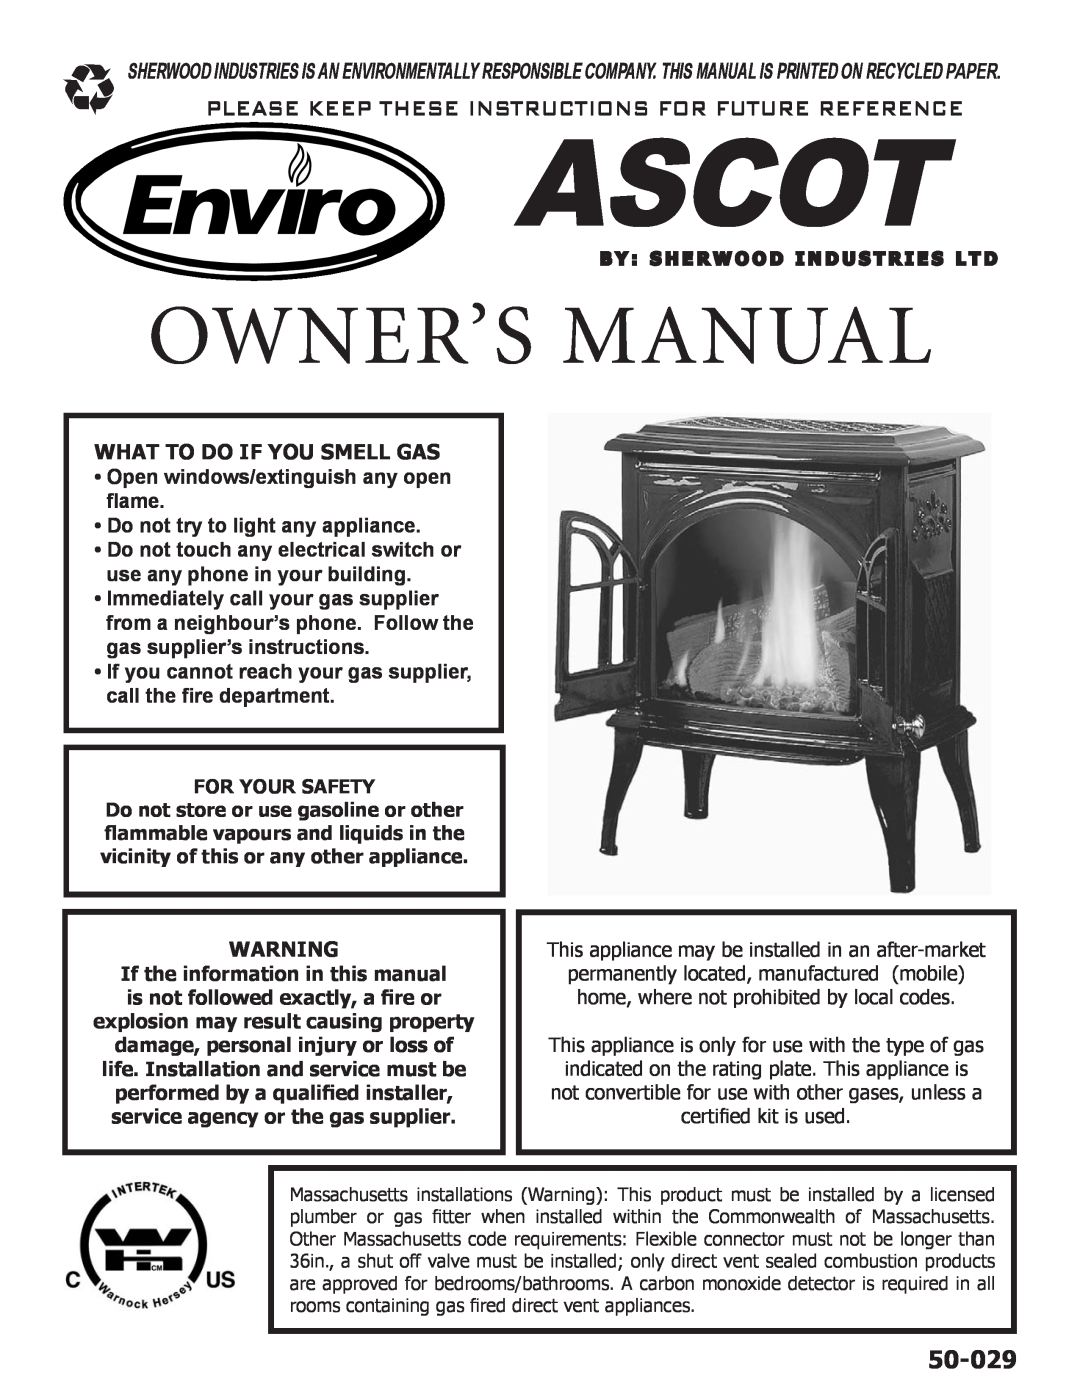 Enviro Ascot owner manual What To Do If You Smell Gas, 50-029 